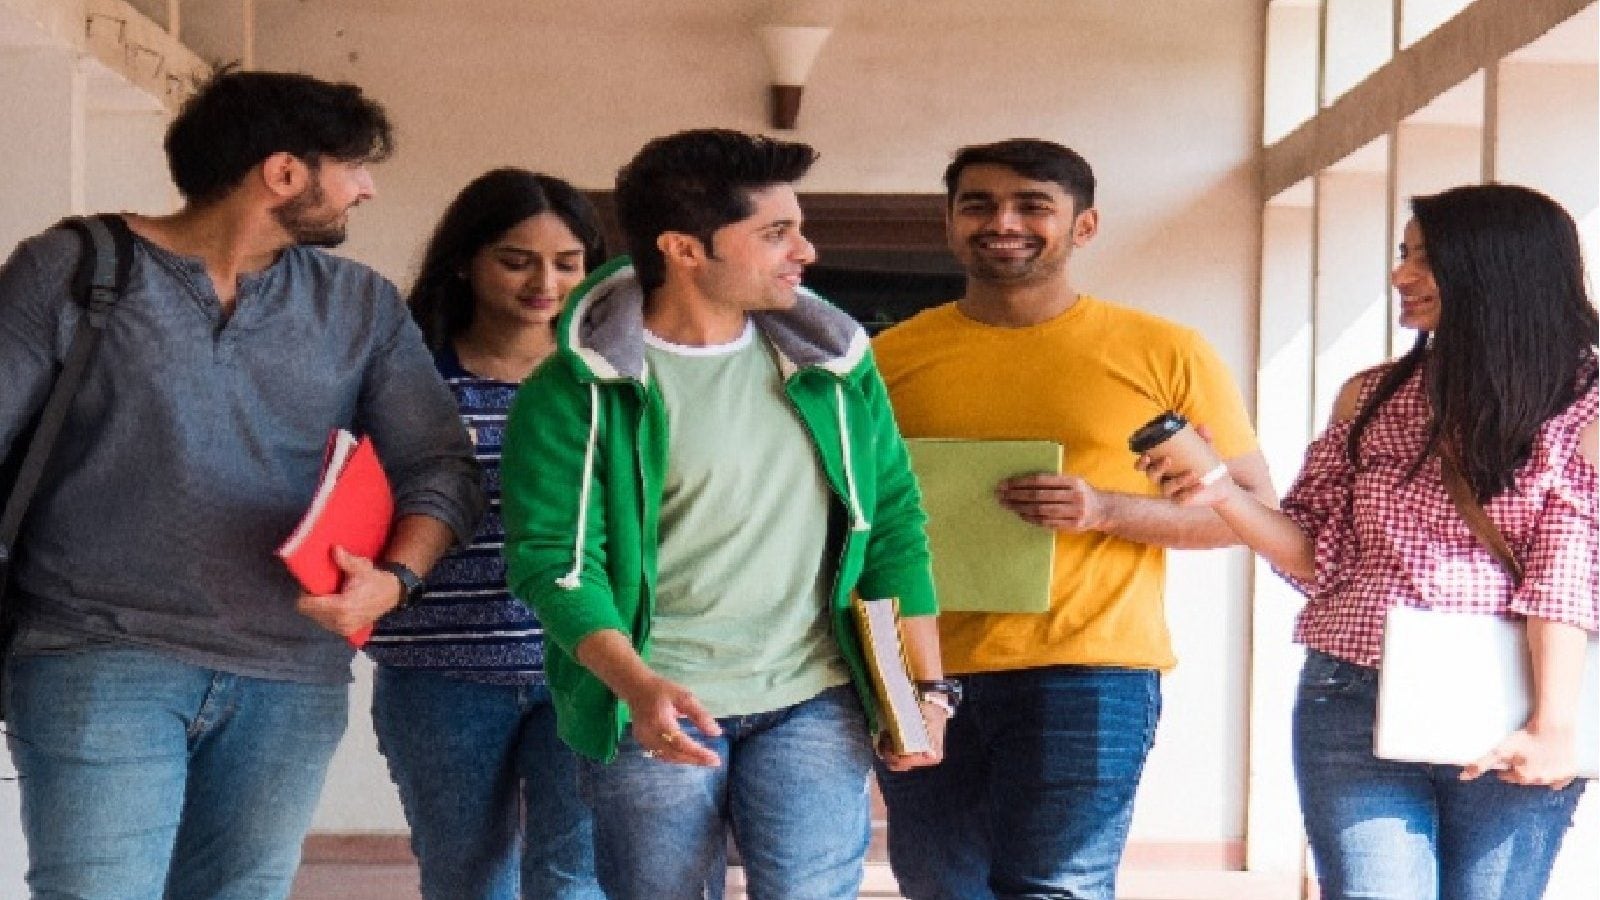 JEE Main 2021 Cut-off Lower Thank Last Year, Check Category-Wise Marks Needed for JEE Advanced